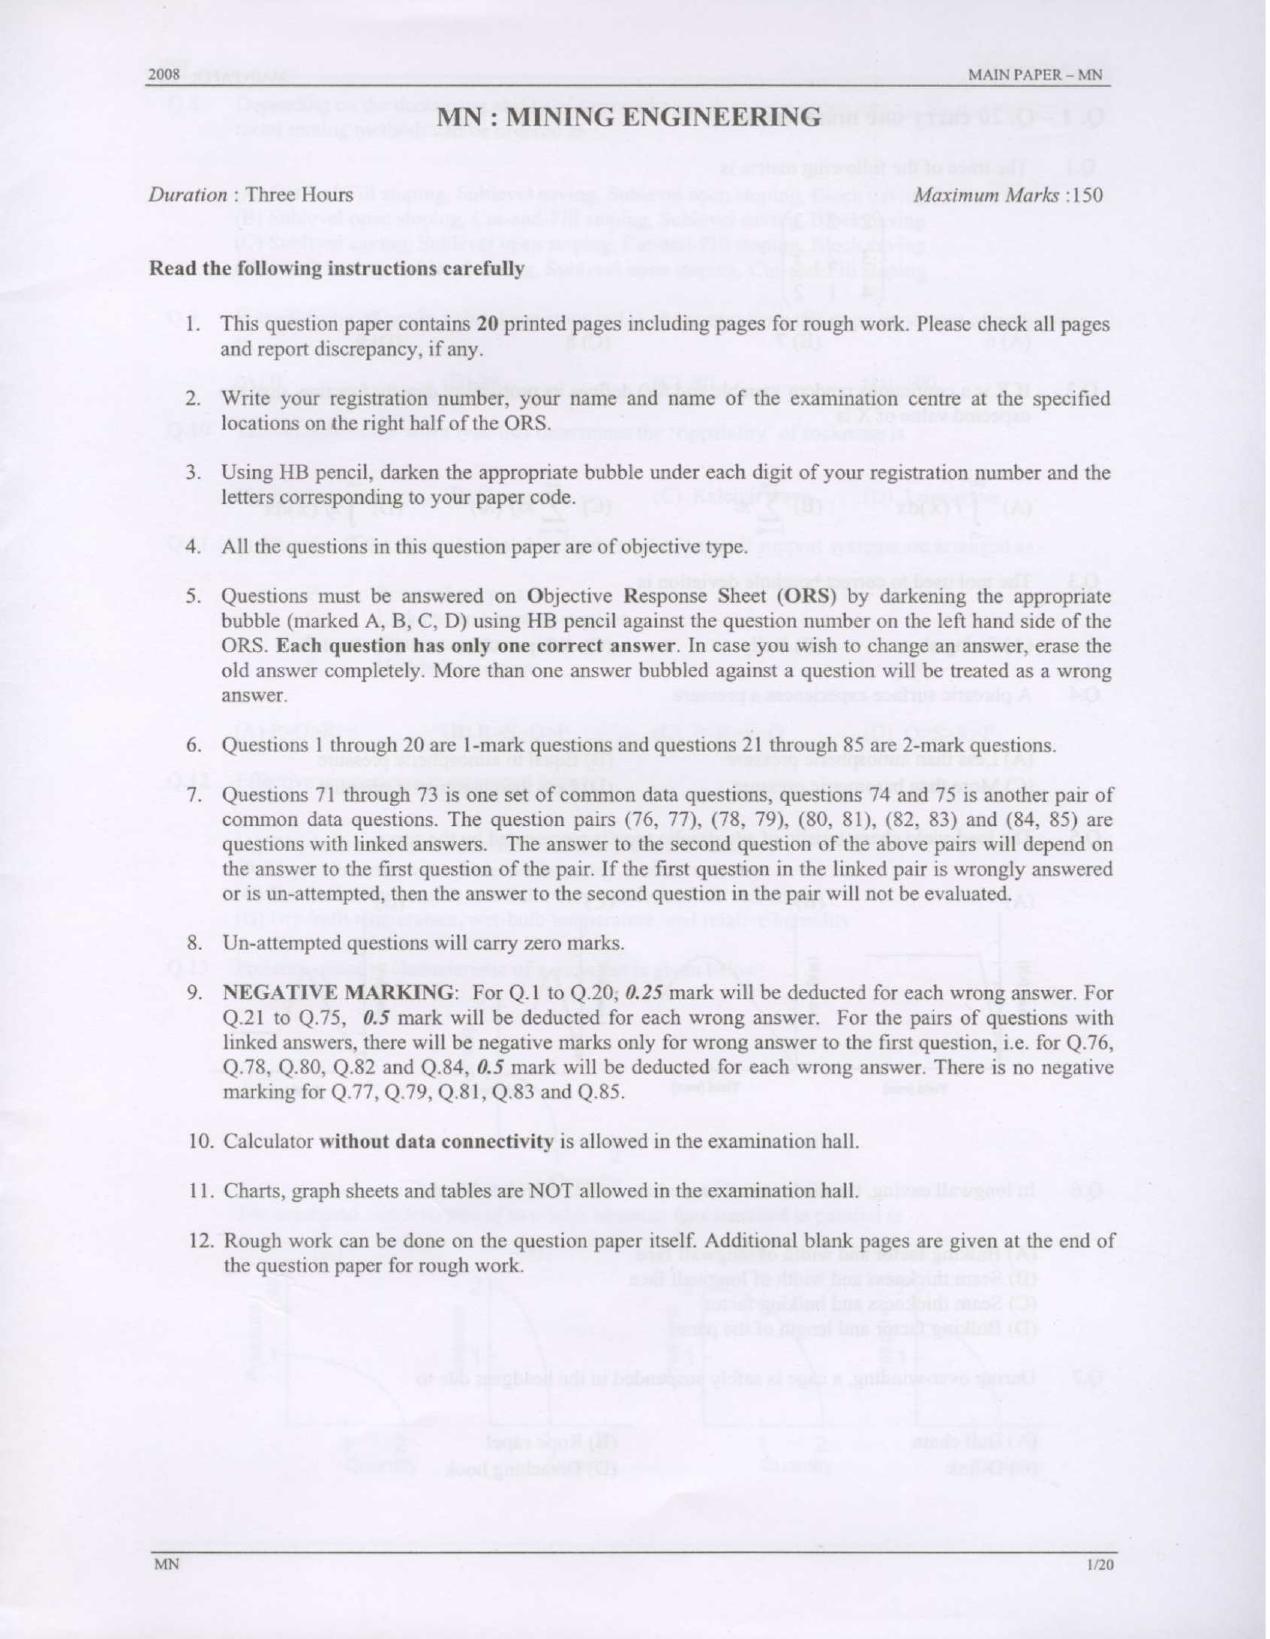 GATE 2008 Mining Engineering (MN) Question Paper with Answer Key - Page 1